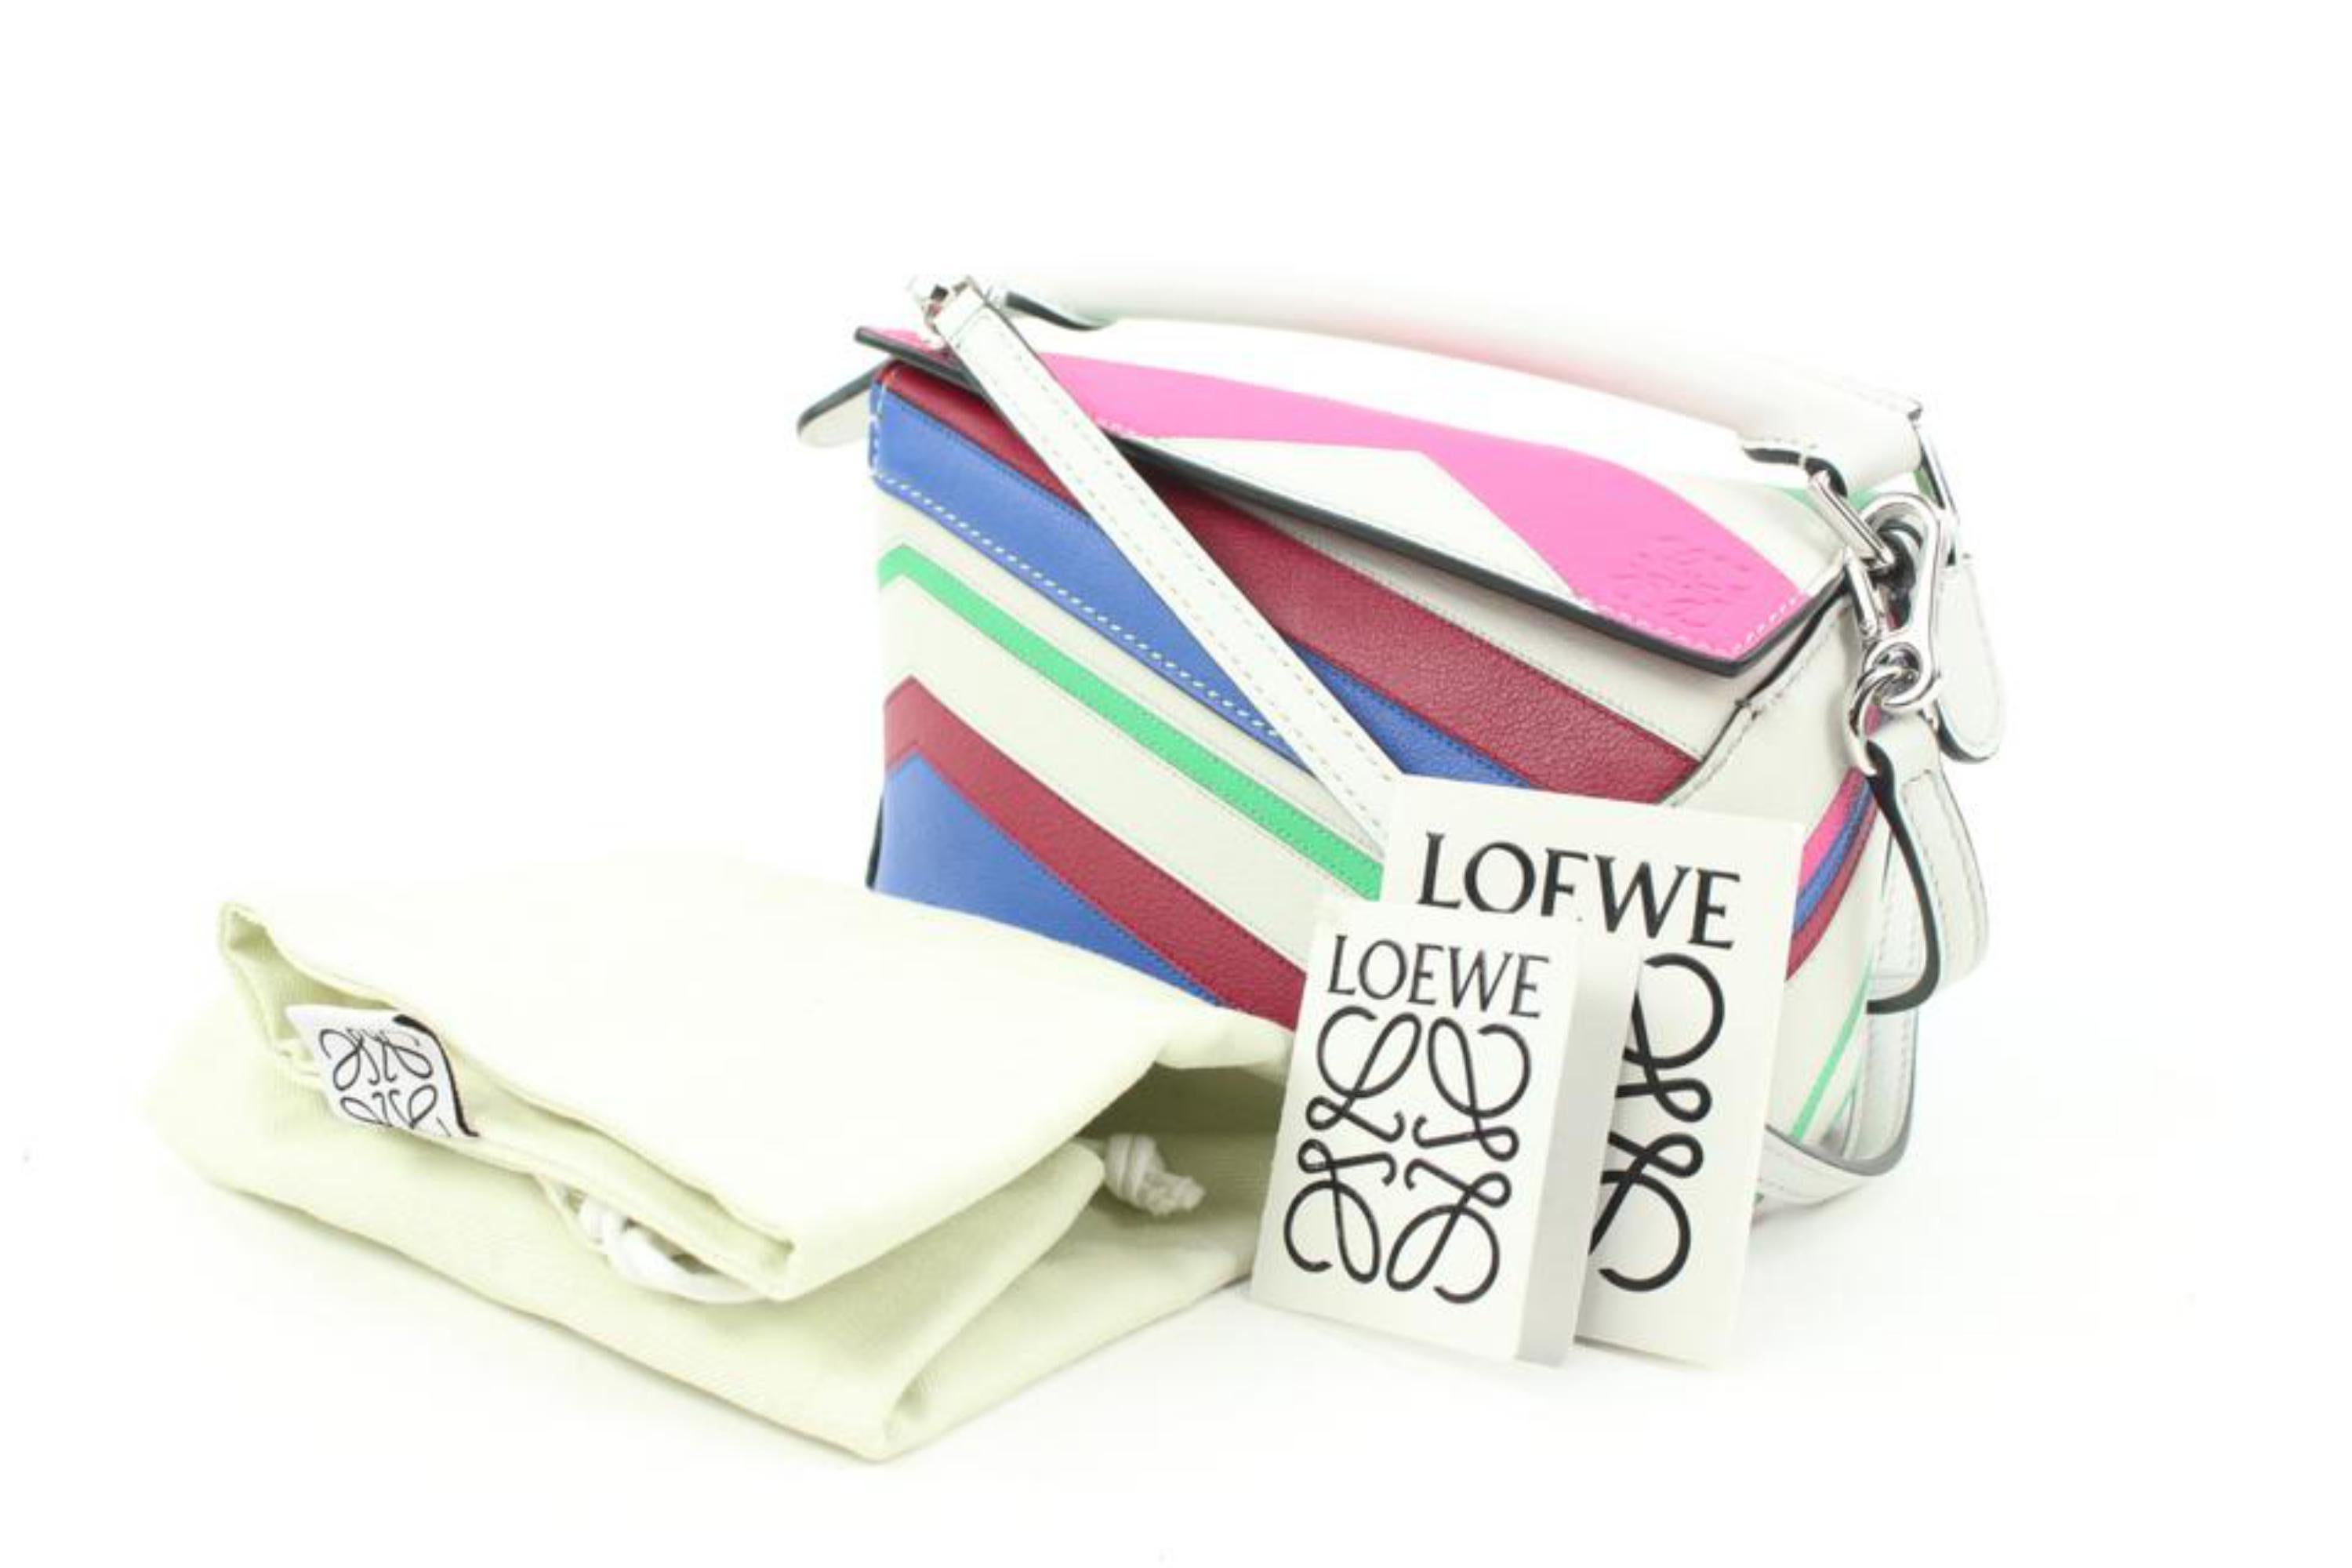 Loewe Limited Multicolor Calfskin Zigzag Mini Puzzle Edge 119lo54
Made In: Spain
Measurements: Length:  7